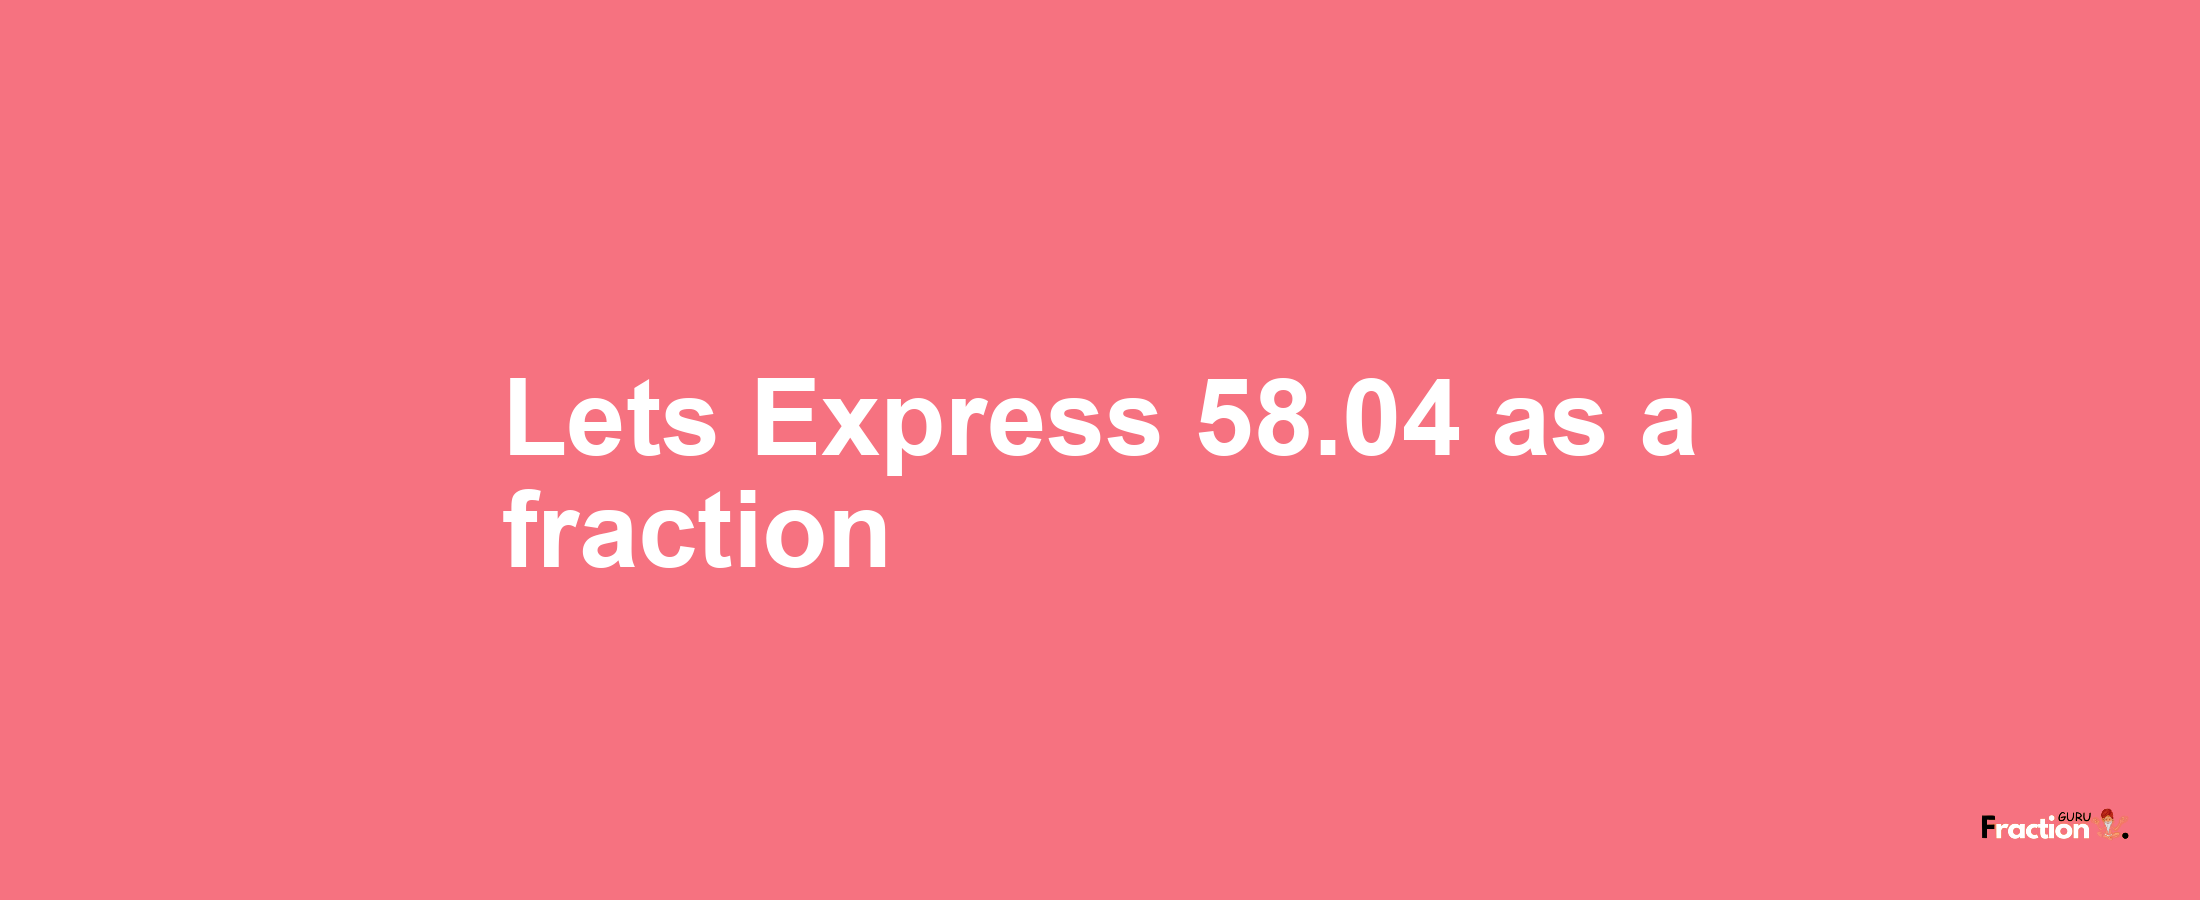 Lets Express 58.04 as afraction